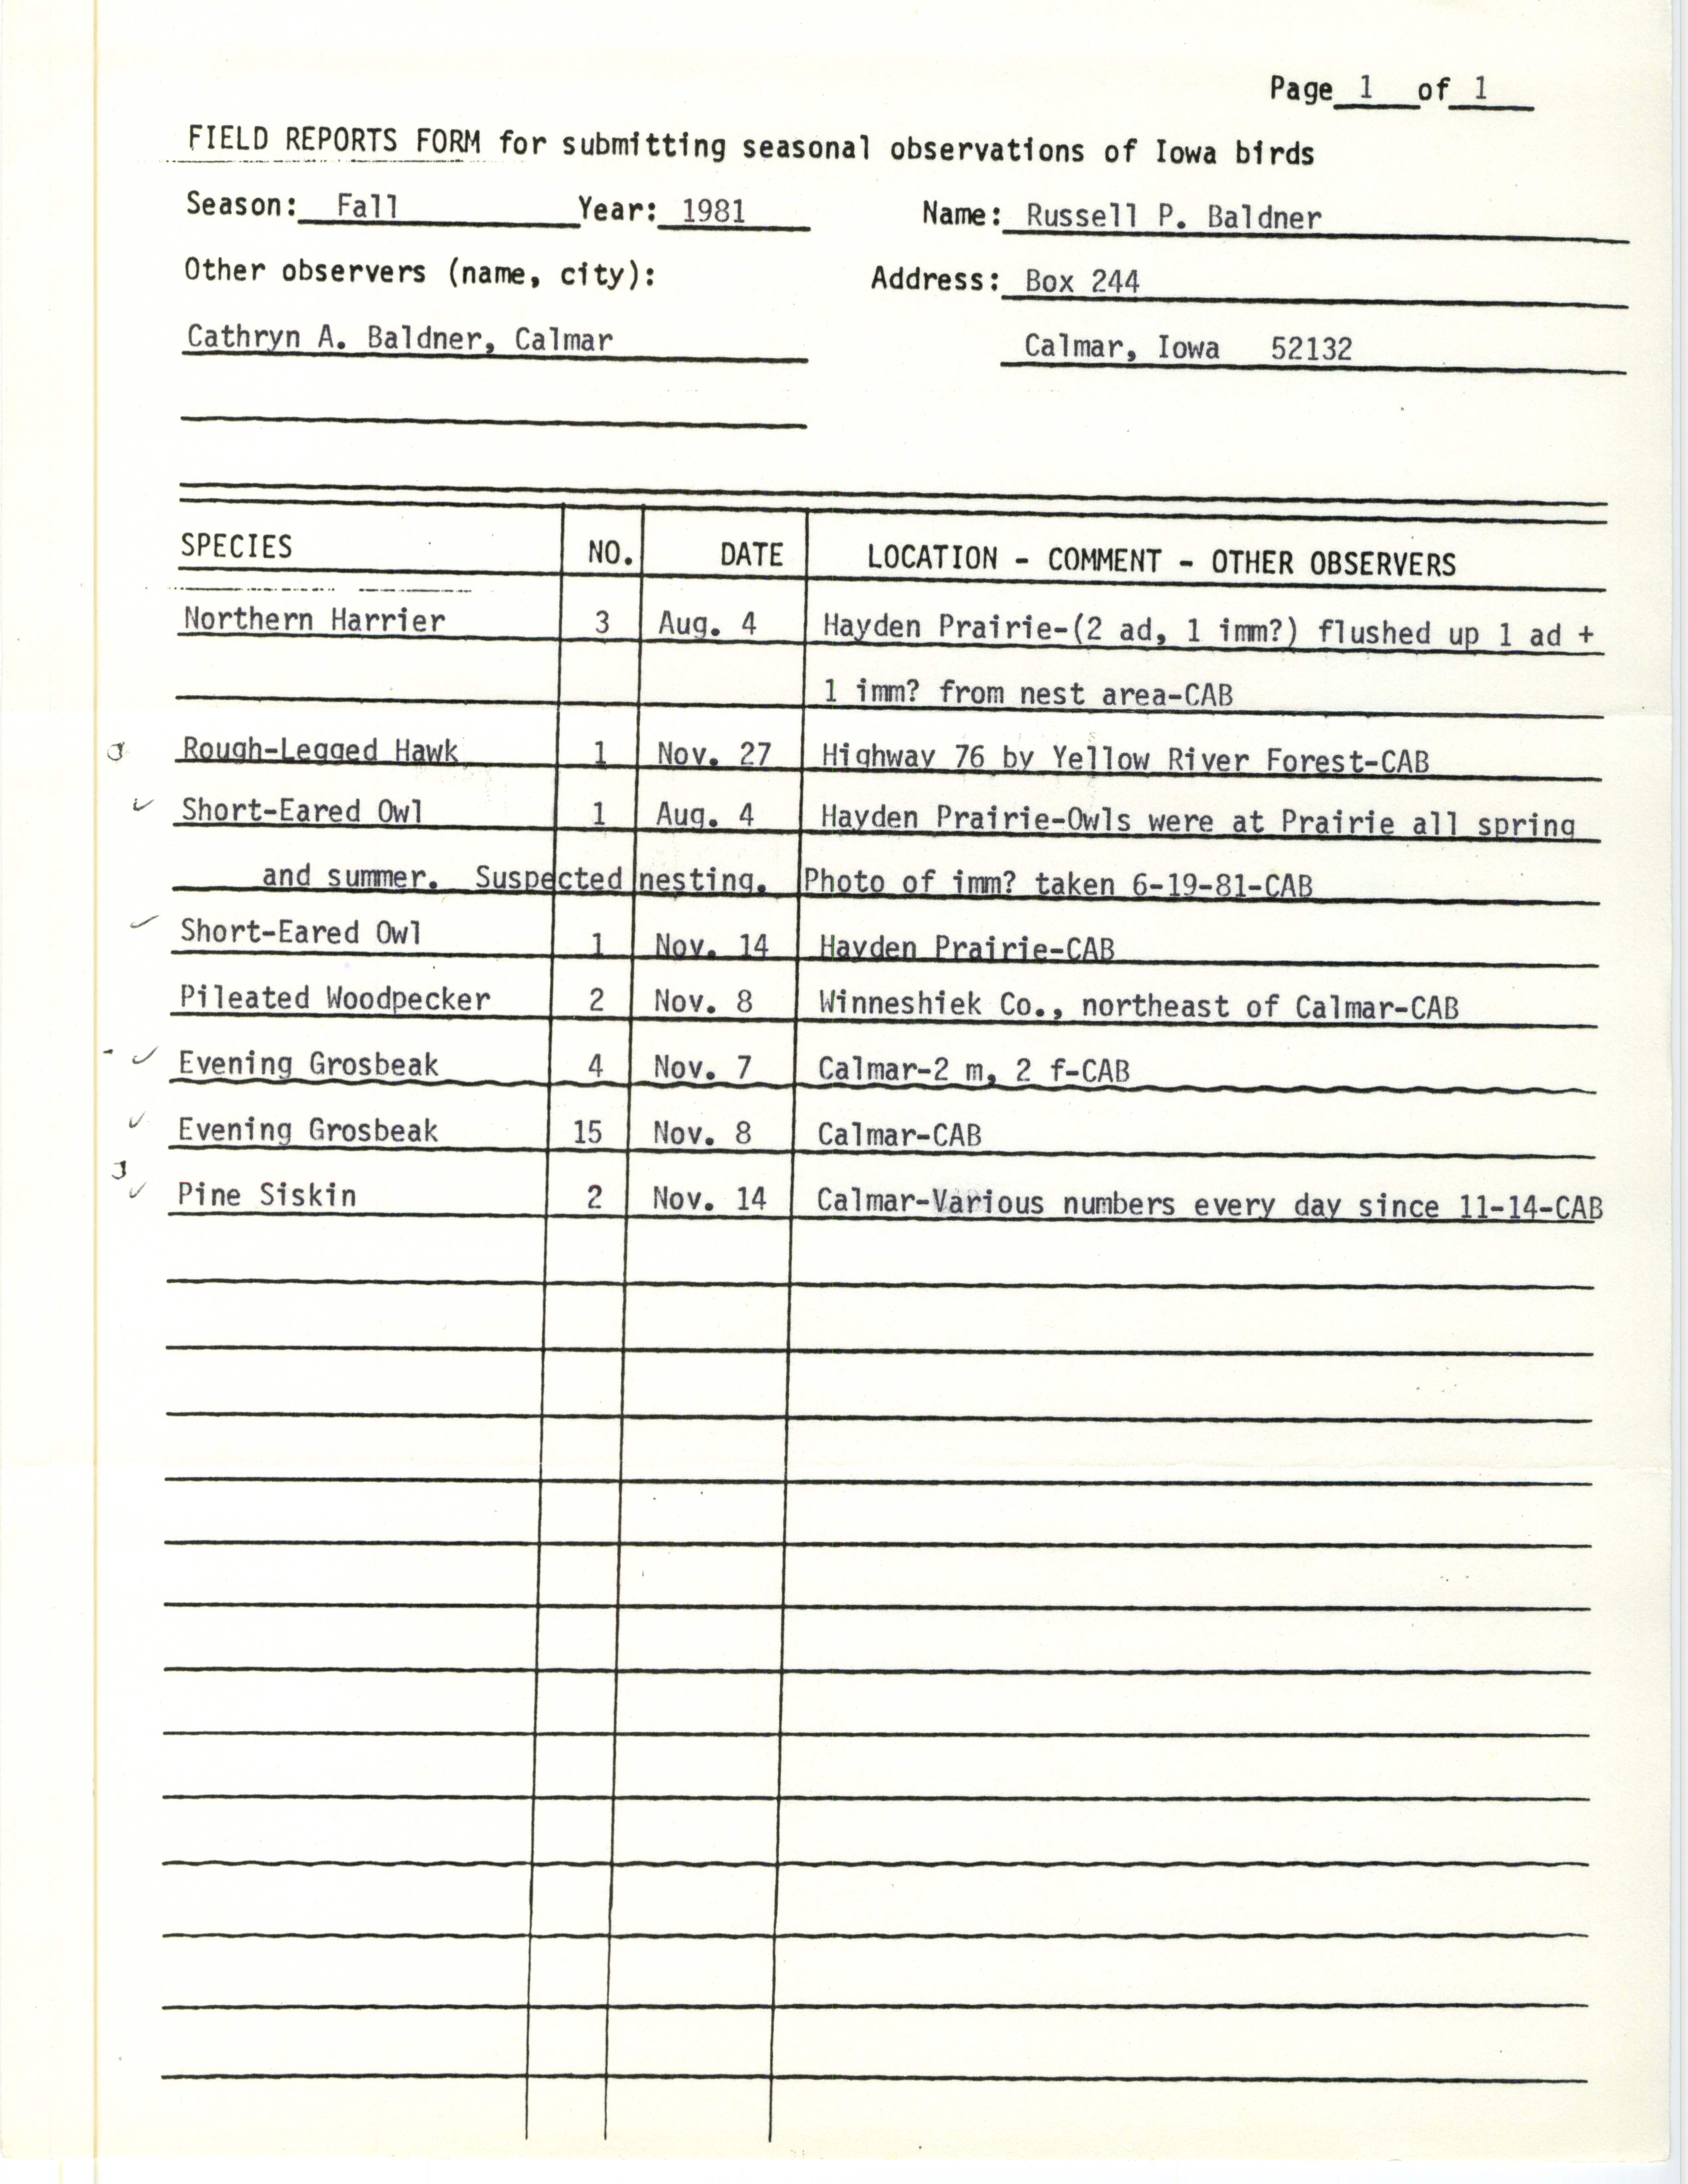 Field notes contributed by Russell P. Baldner, fall 1981